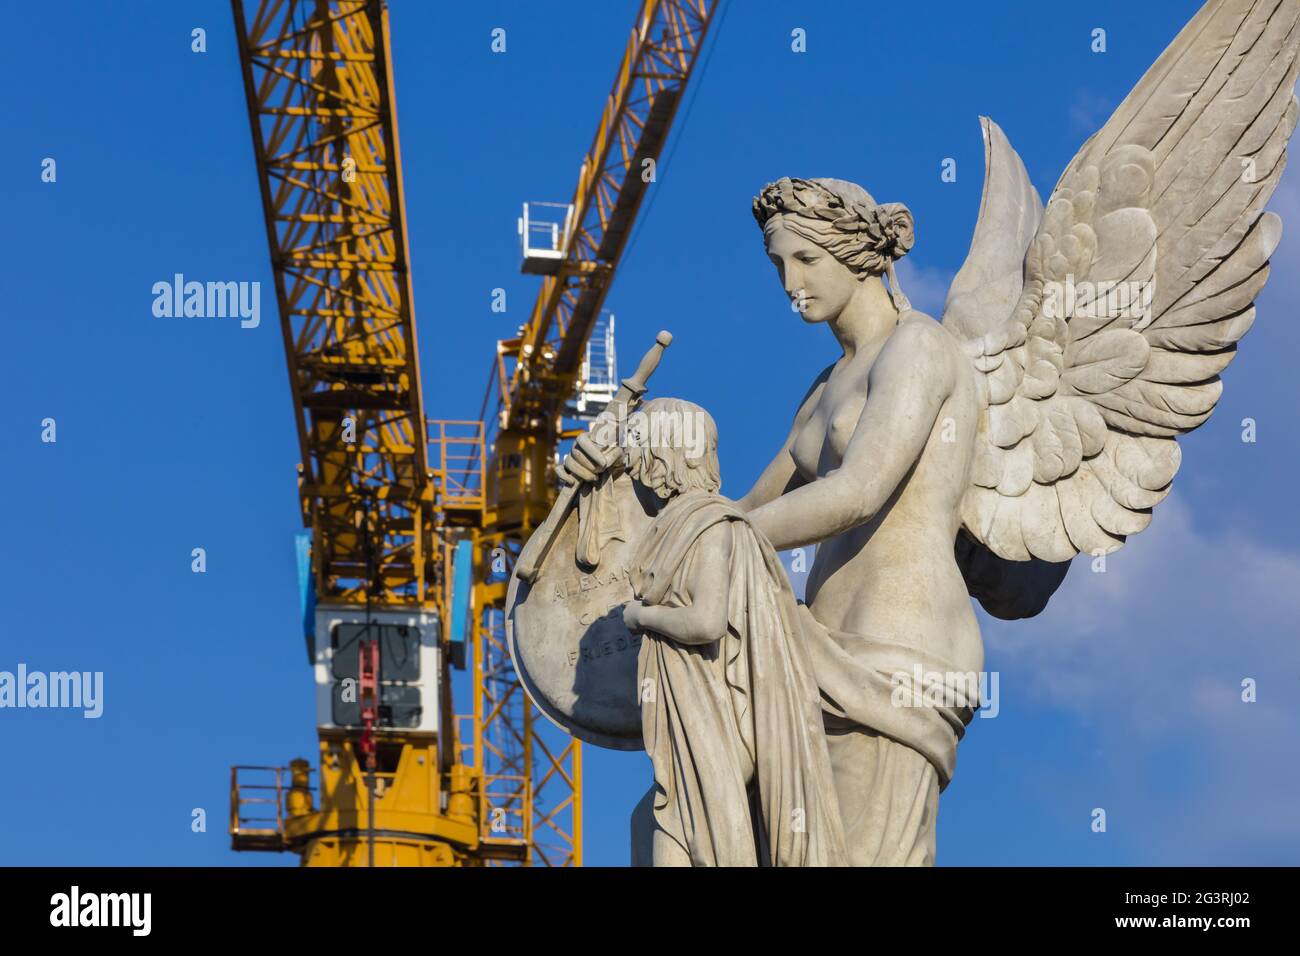 Cultural history, Berlin cultural policy, cultural industry, Berlin crafts, Stock Photo